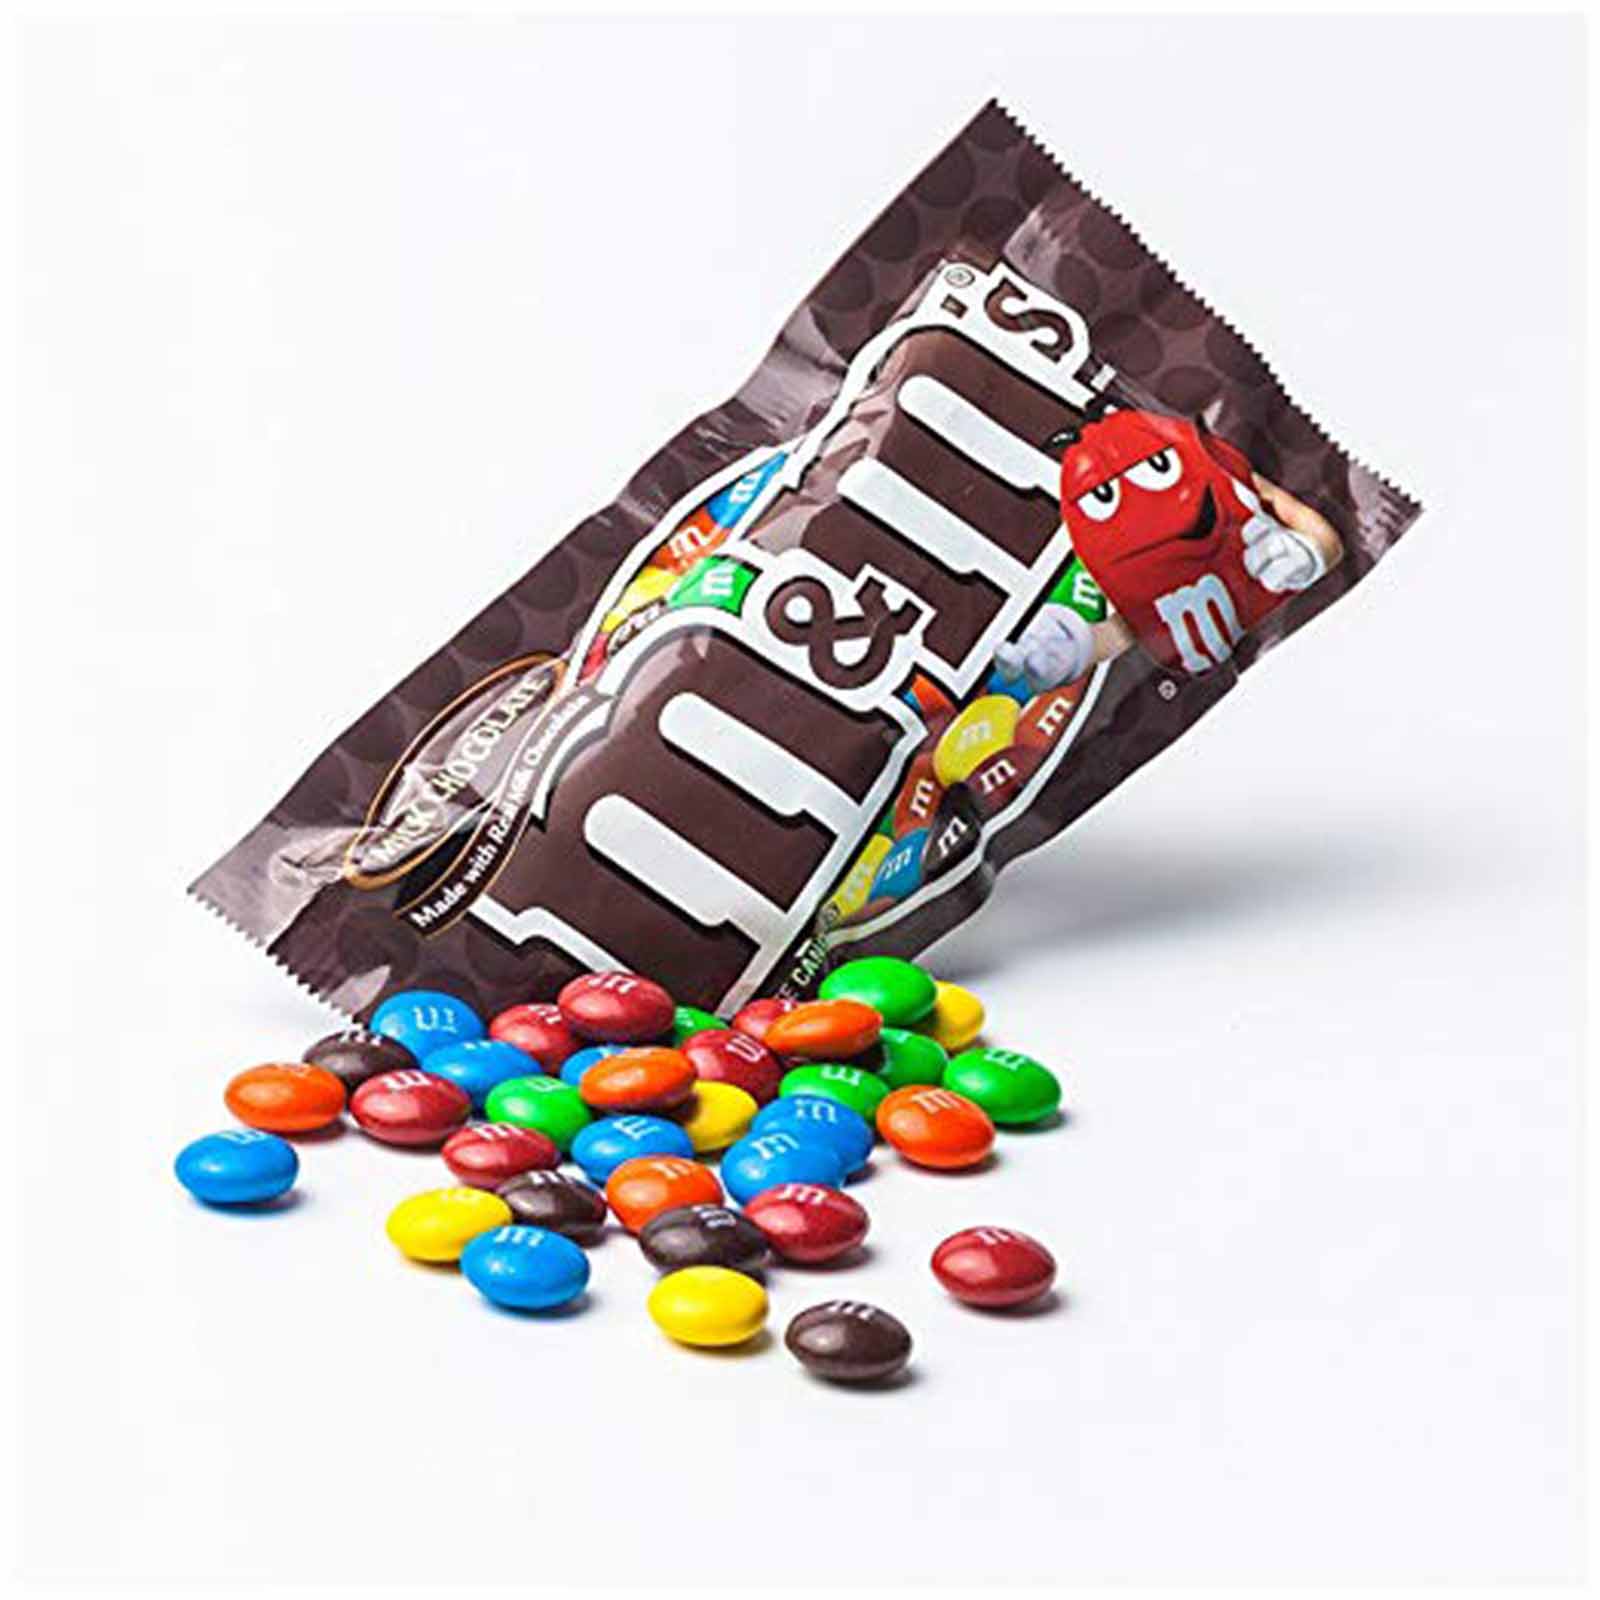 M&M'S Milk Chocolate Candy Singles Size 1.69-Ounce Pouch 48-Count Box